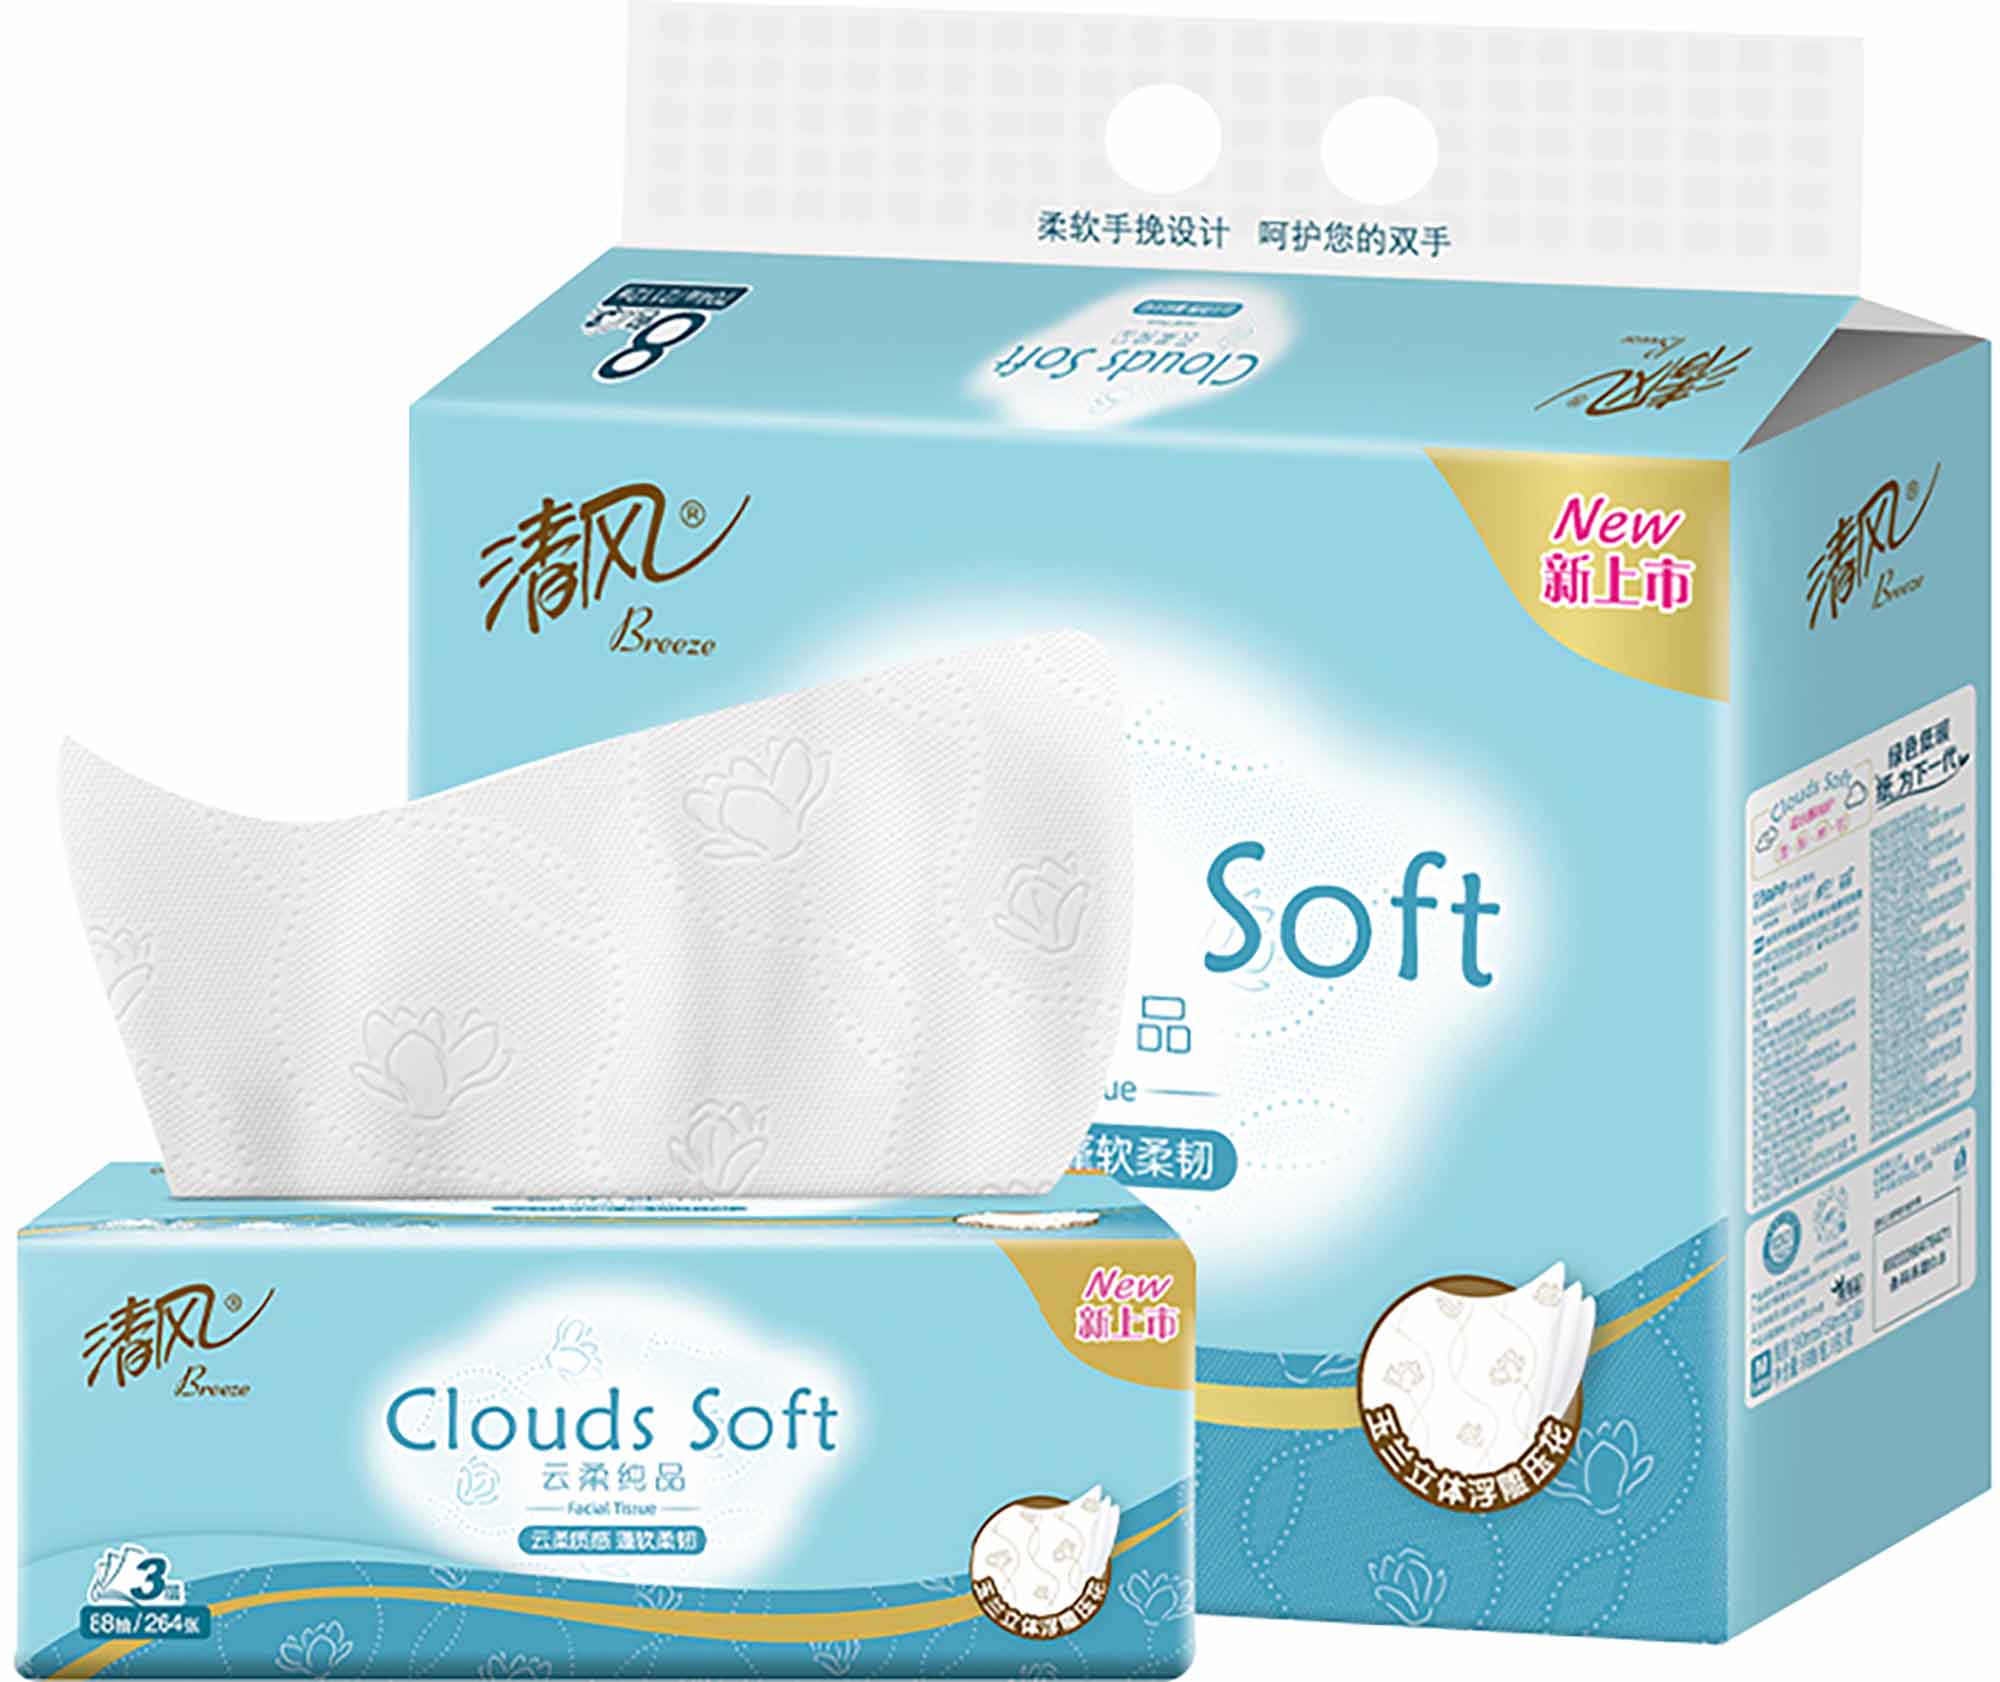 The Clouds Soft range: packaging was enhanced for convenience 